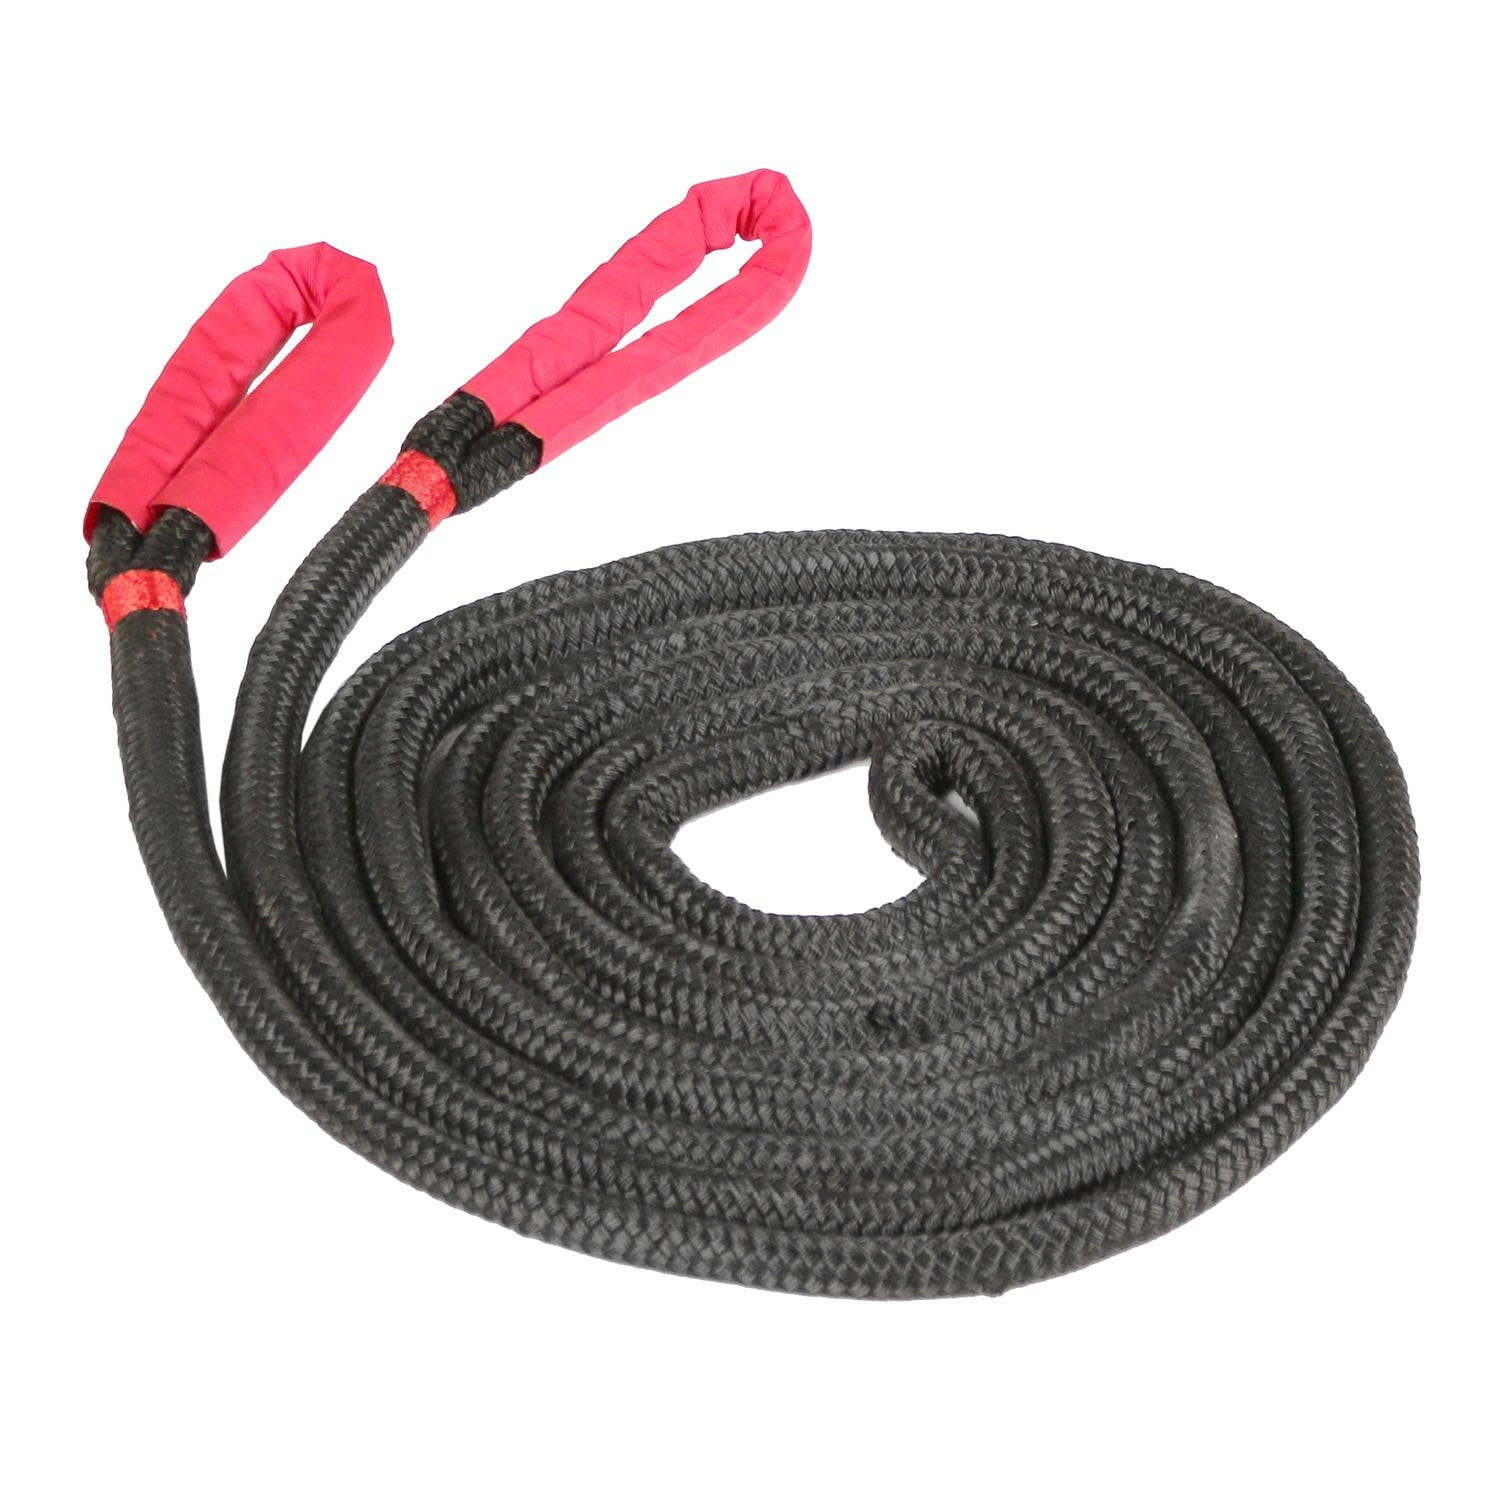 Rugged Ridge 15104.05 Kinetic Recovery Rope; 7/8in. x 30-Feet; 7500 WLL (Working Load Limit)